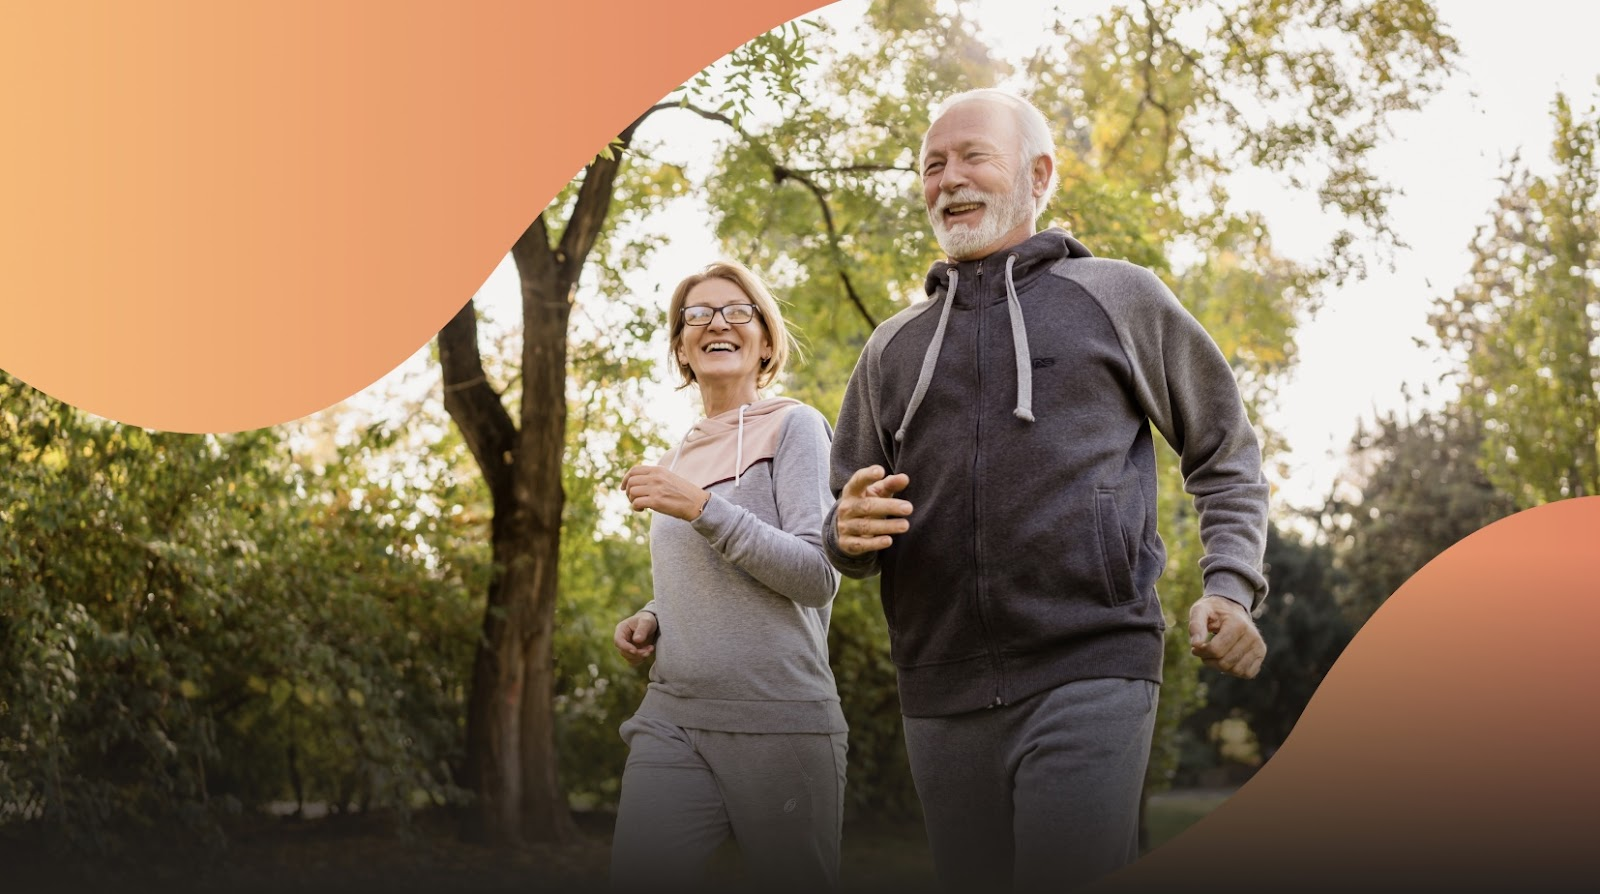 5 Reasons Why Walking is Good for Seniors